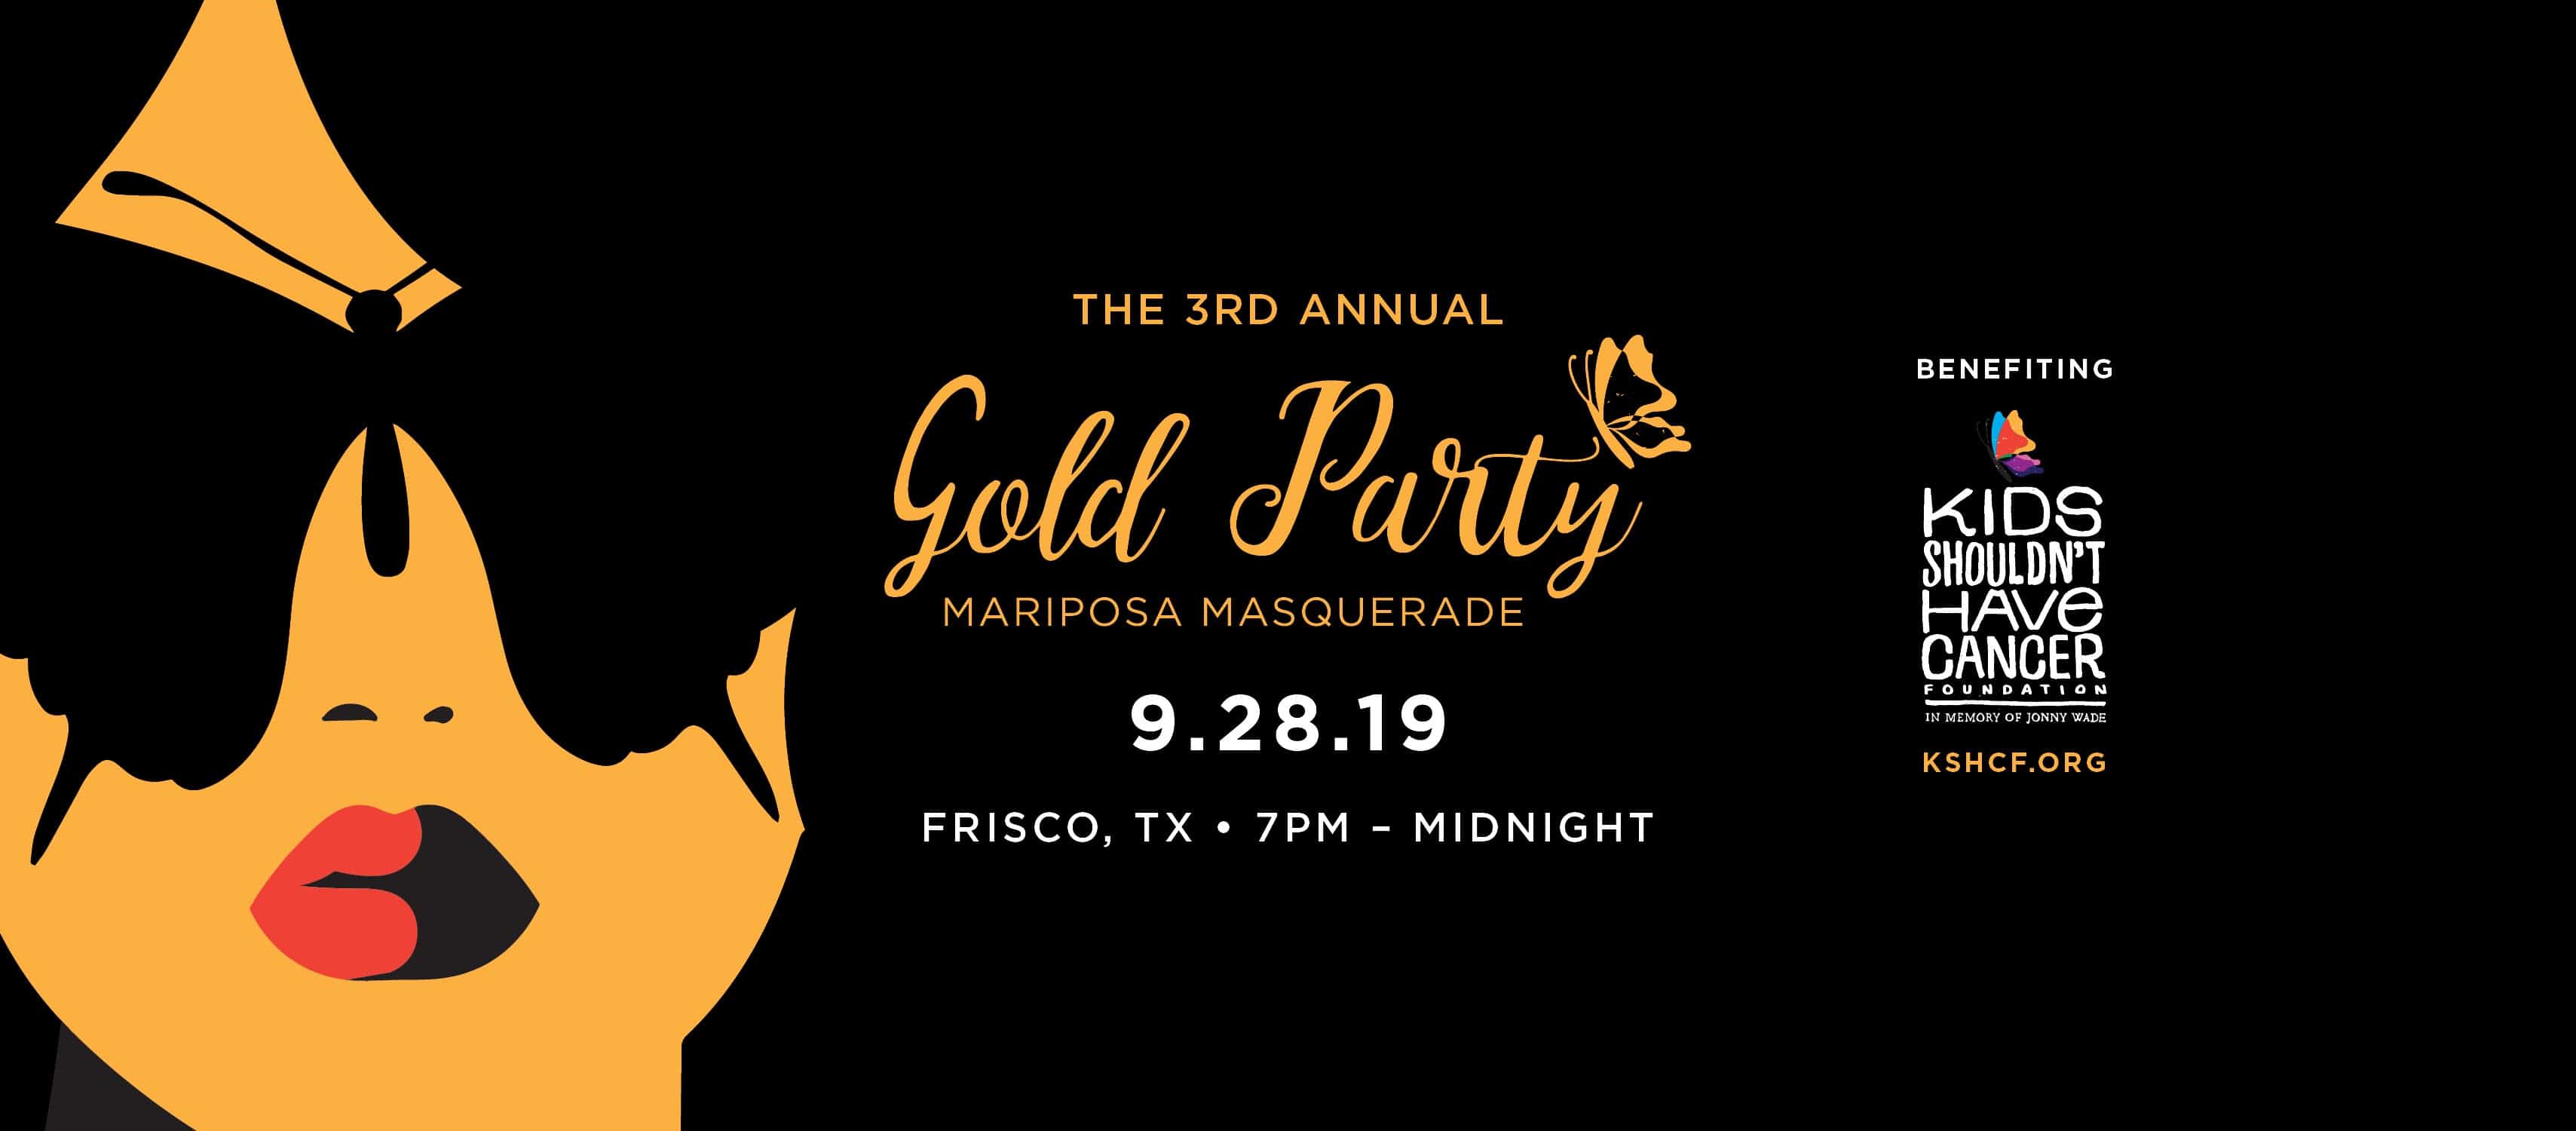 Kids Shouldn’t Have Cancer Gold Party will be hosted at Verona Villa (6591 Dallas Parkway) in Frisco on Saturday, September 28 from 7 PM until midnight